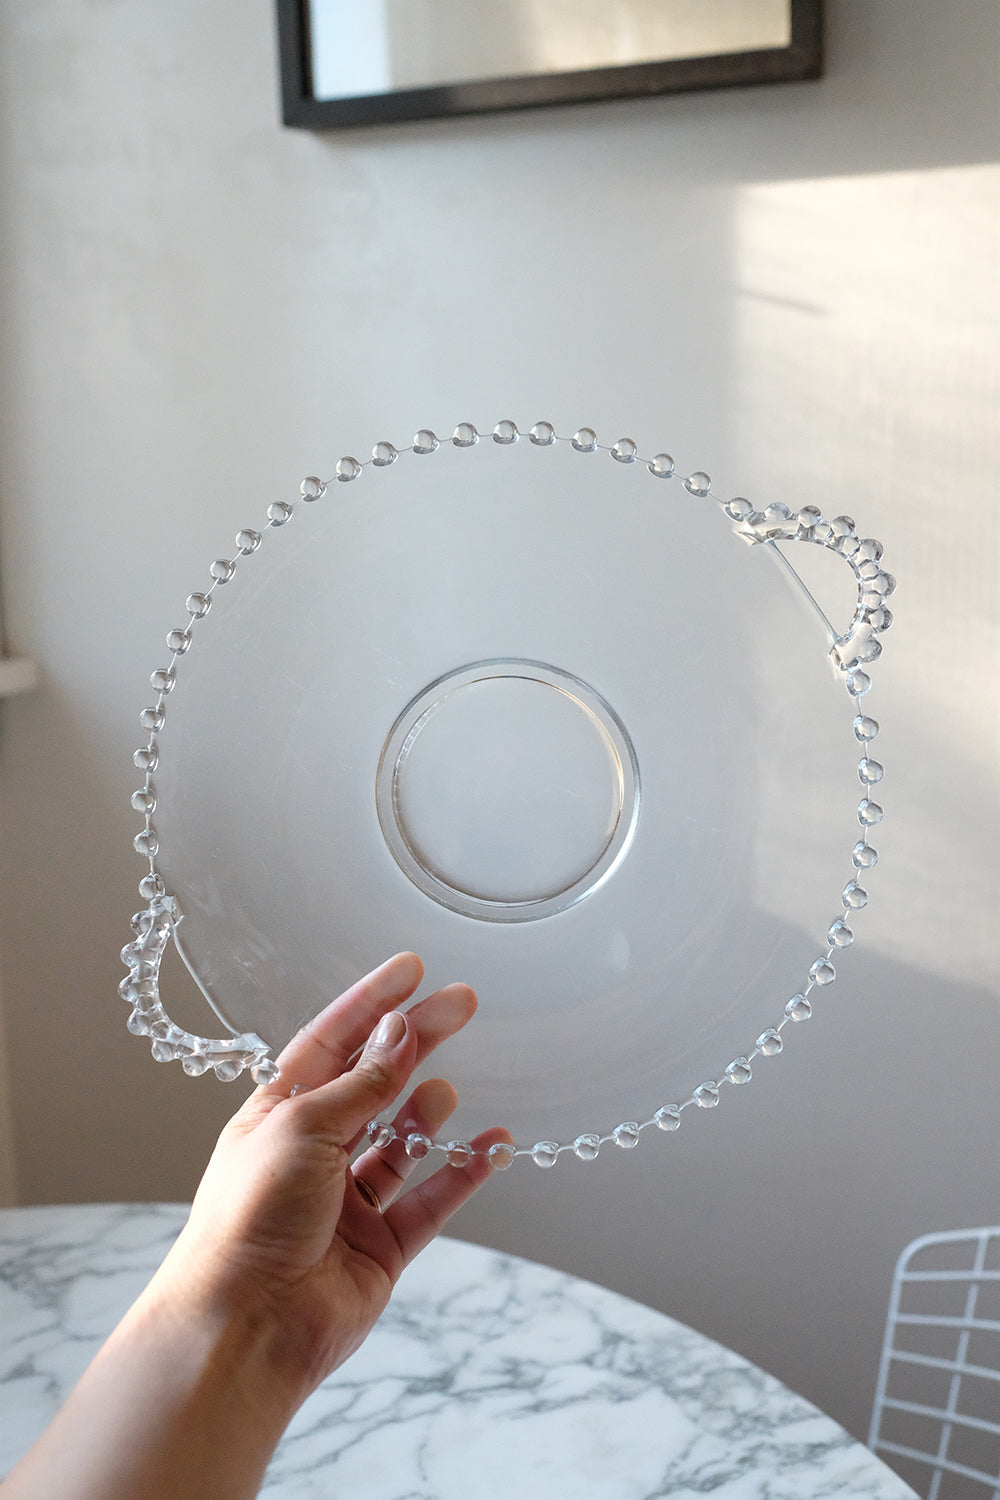 glass serving plate